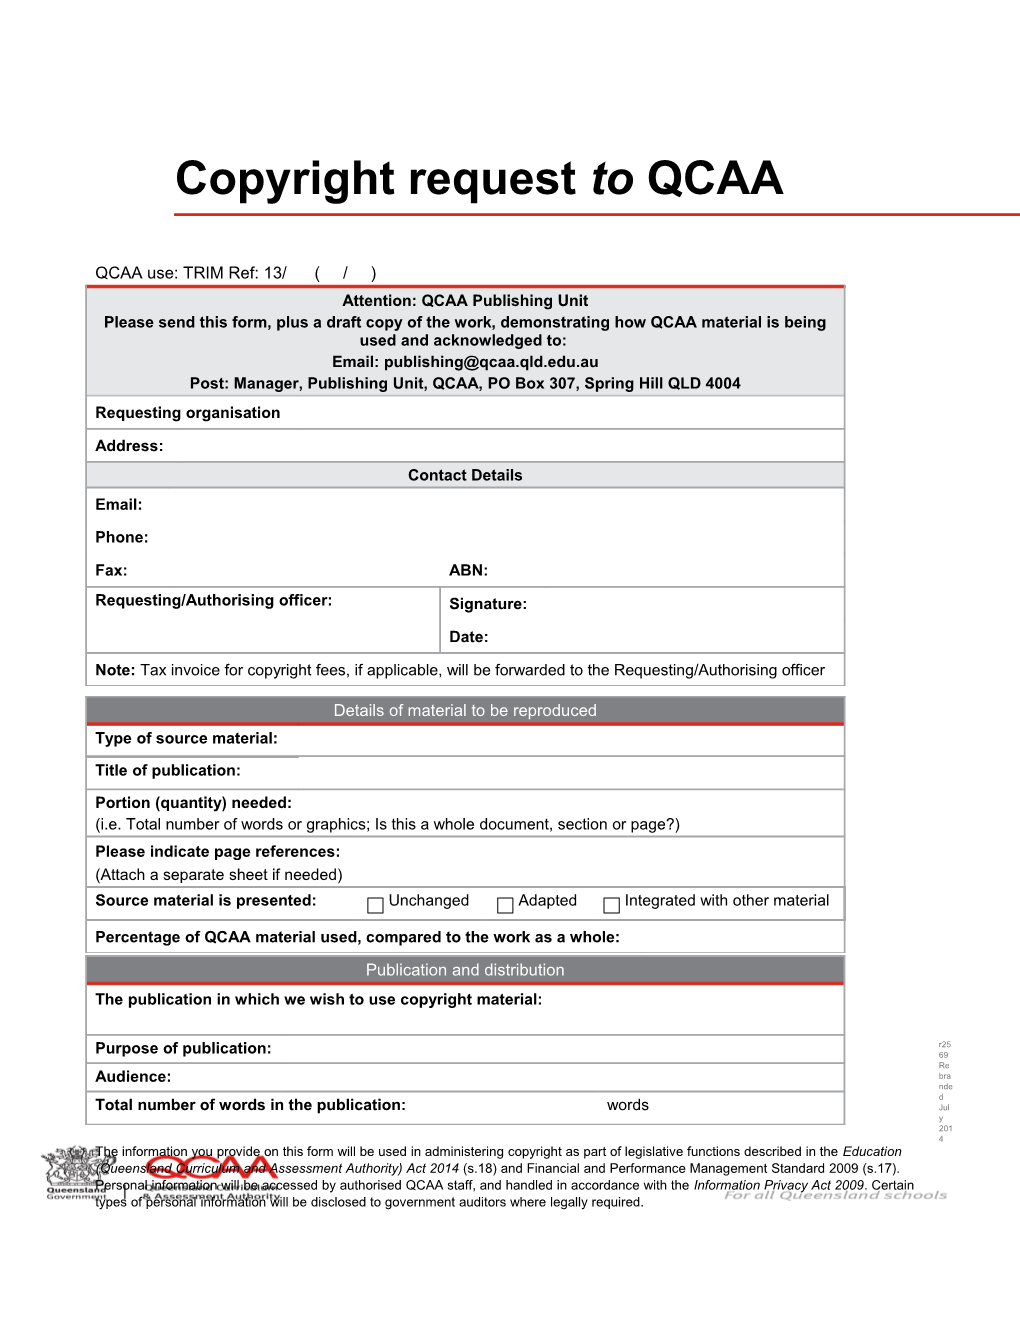 QCAA Copyright Request